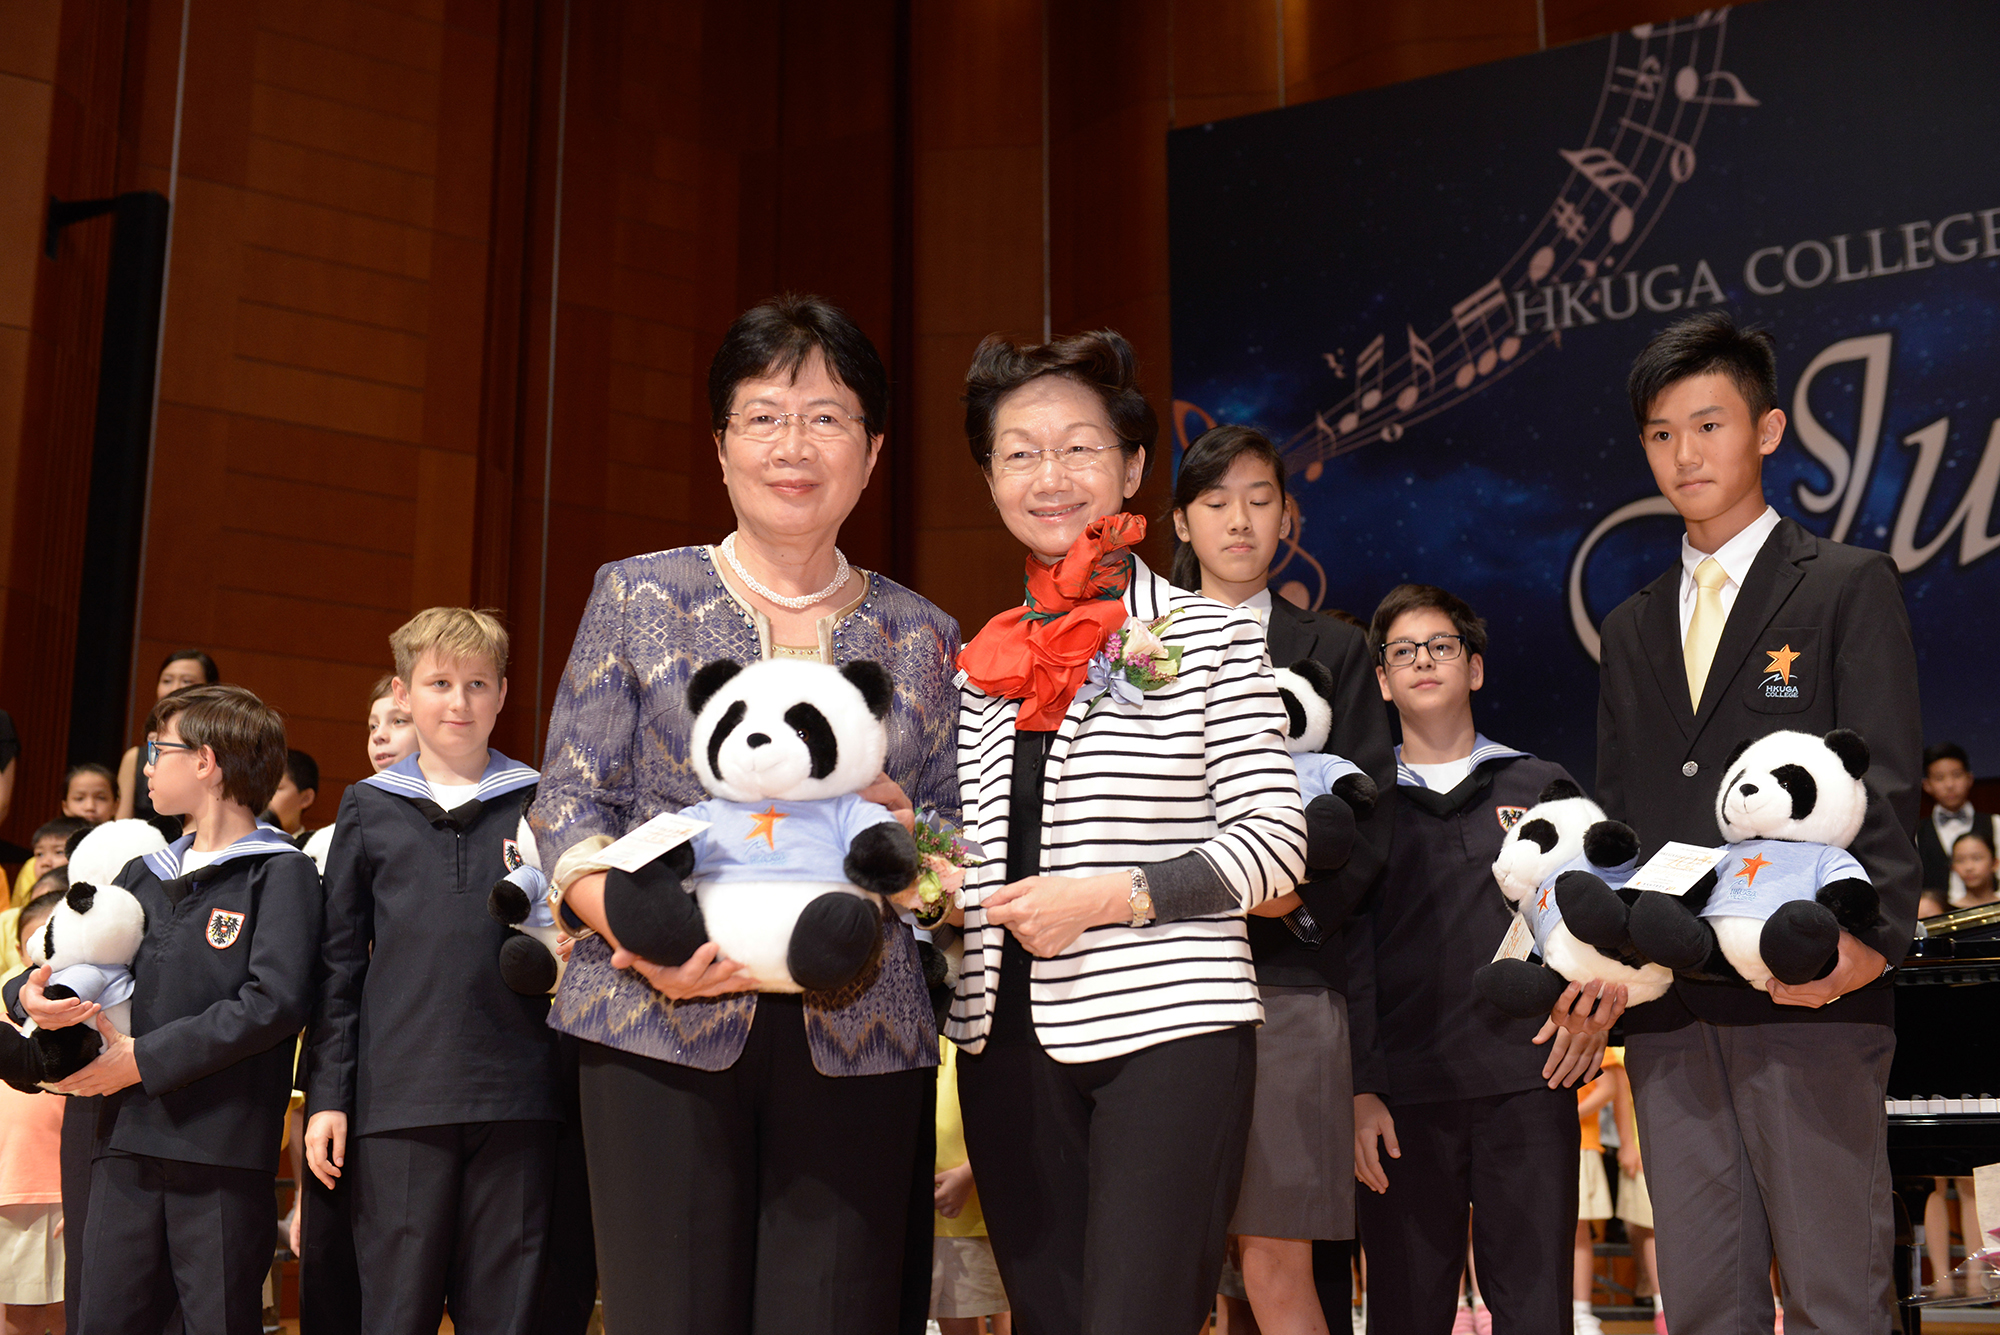 Mrs. Lo Lee Oi Lin (Chairman of HKUGAEF) and Dr. Shen Shir Ming (Supervisor of HKUGAC)